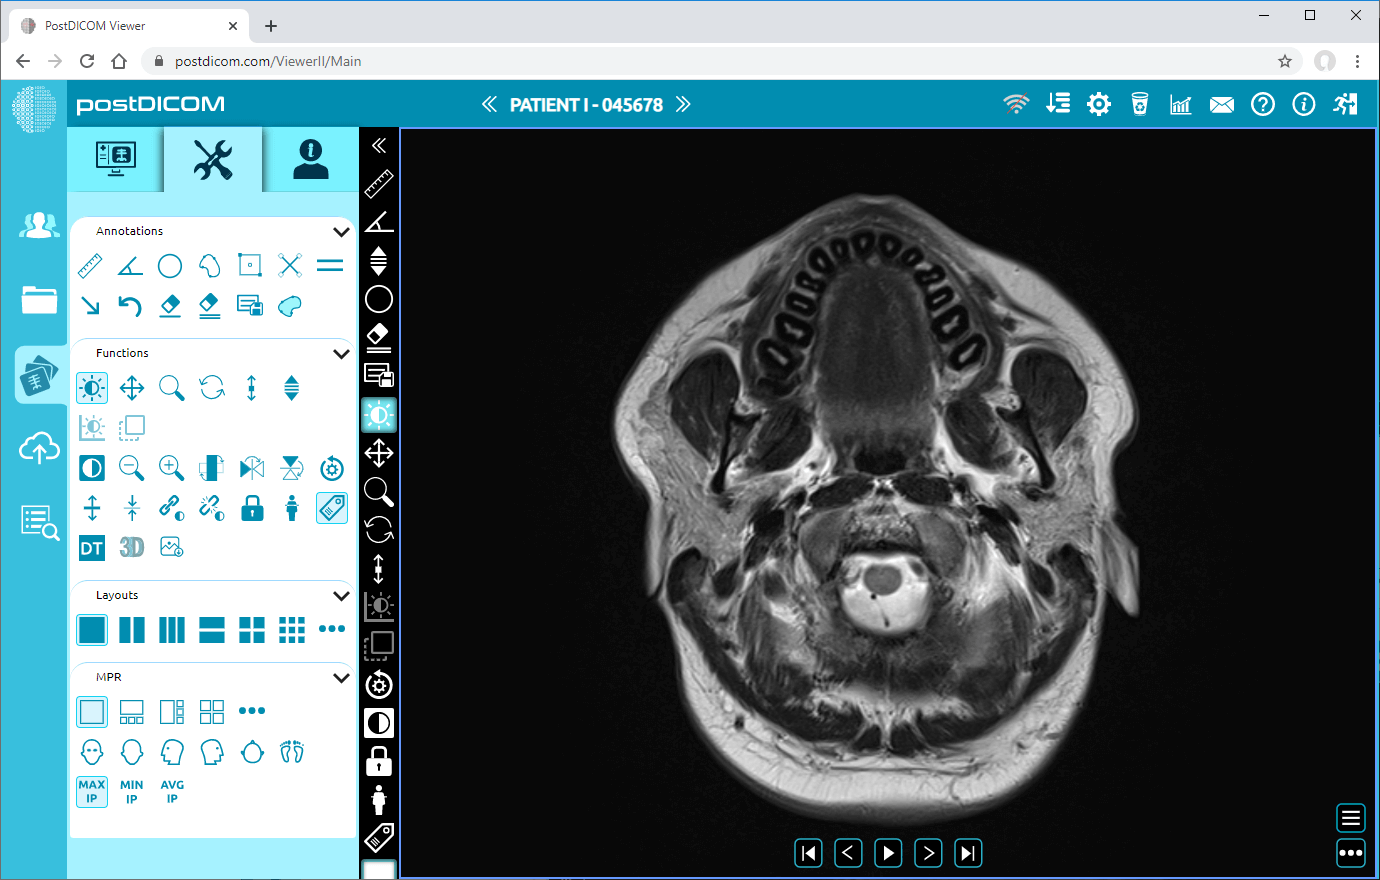 showing and hiding patient information on viewport